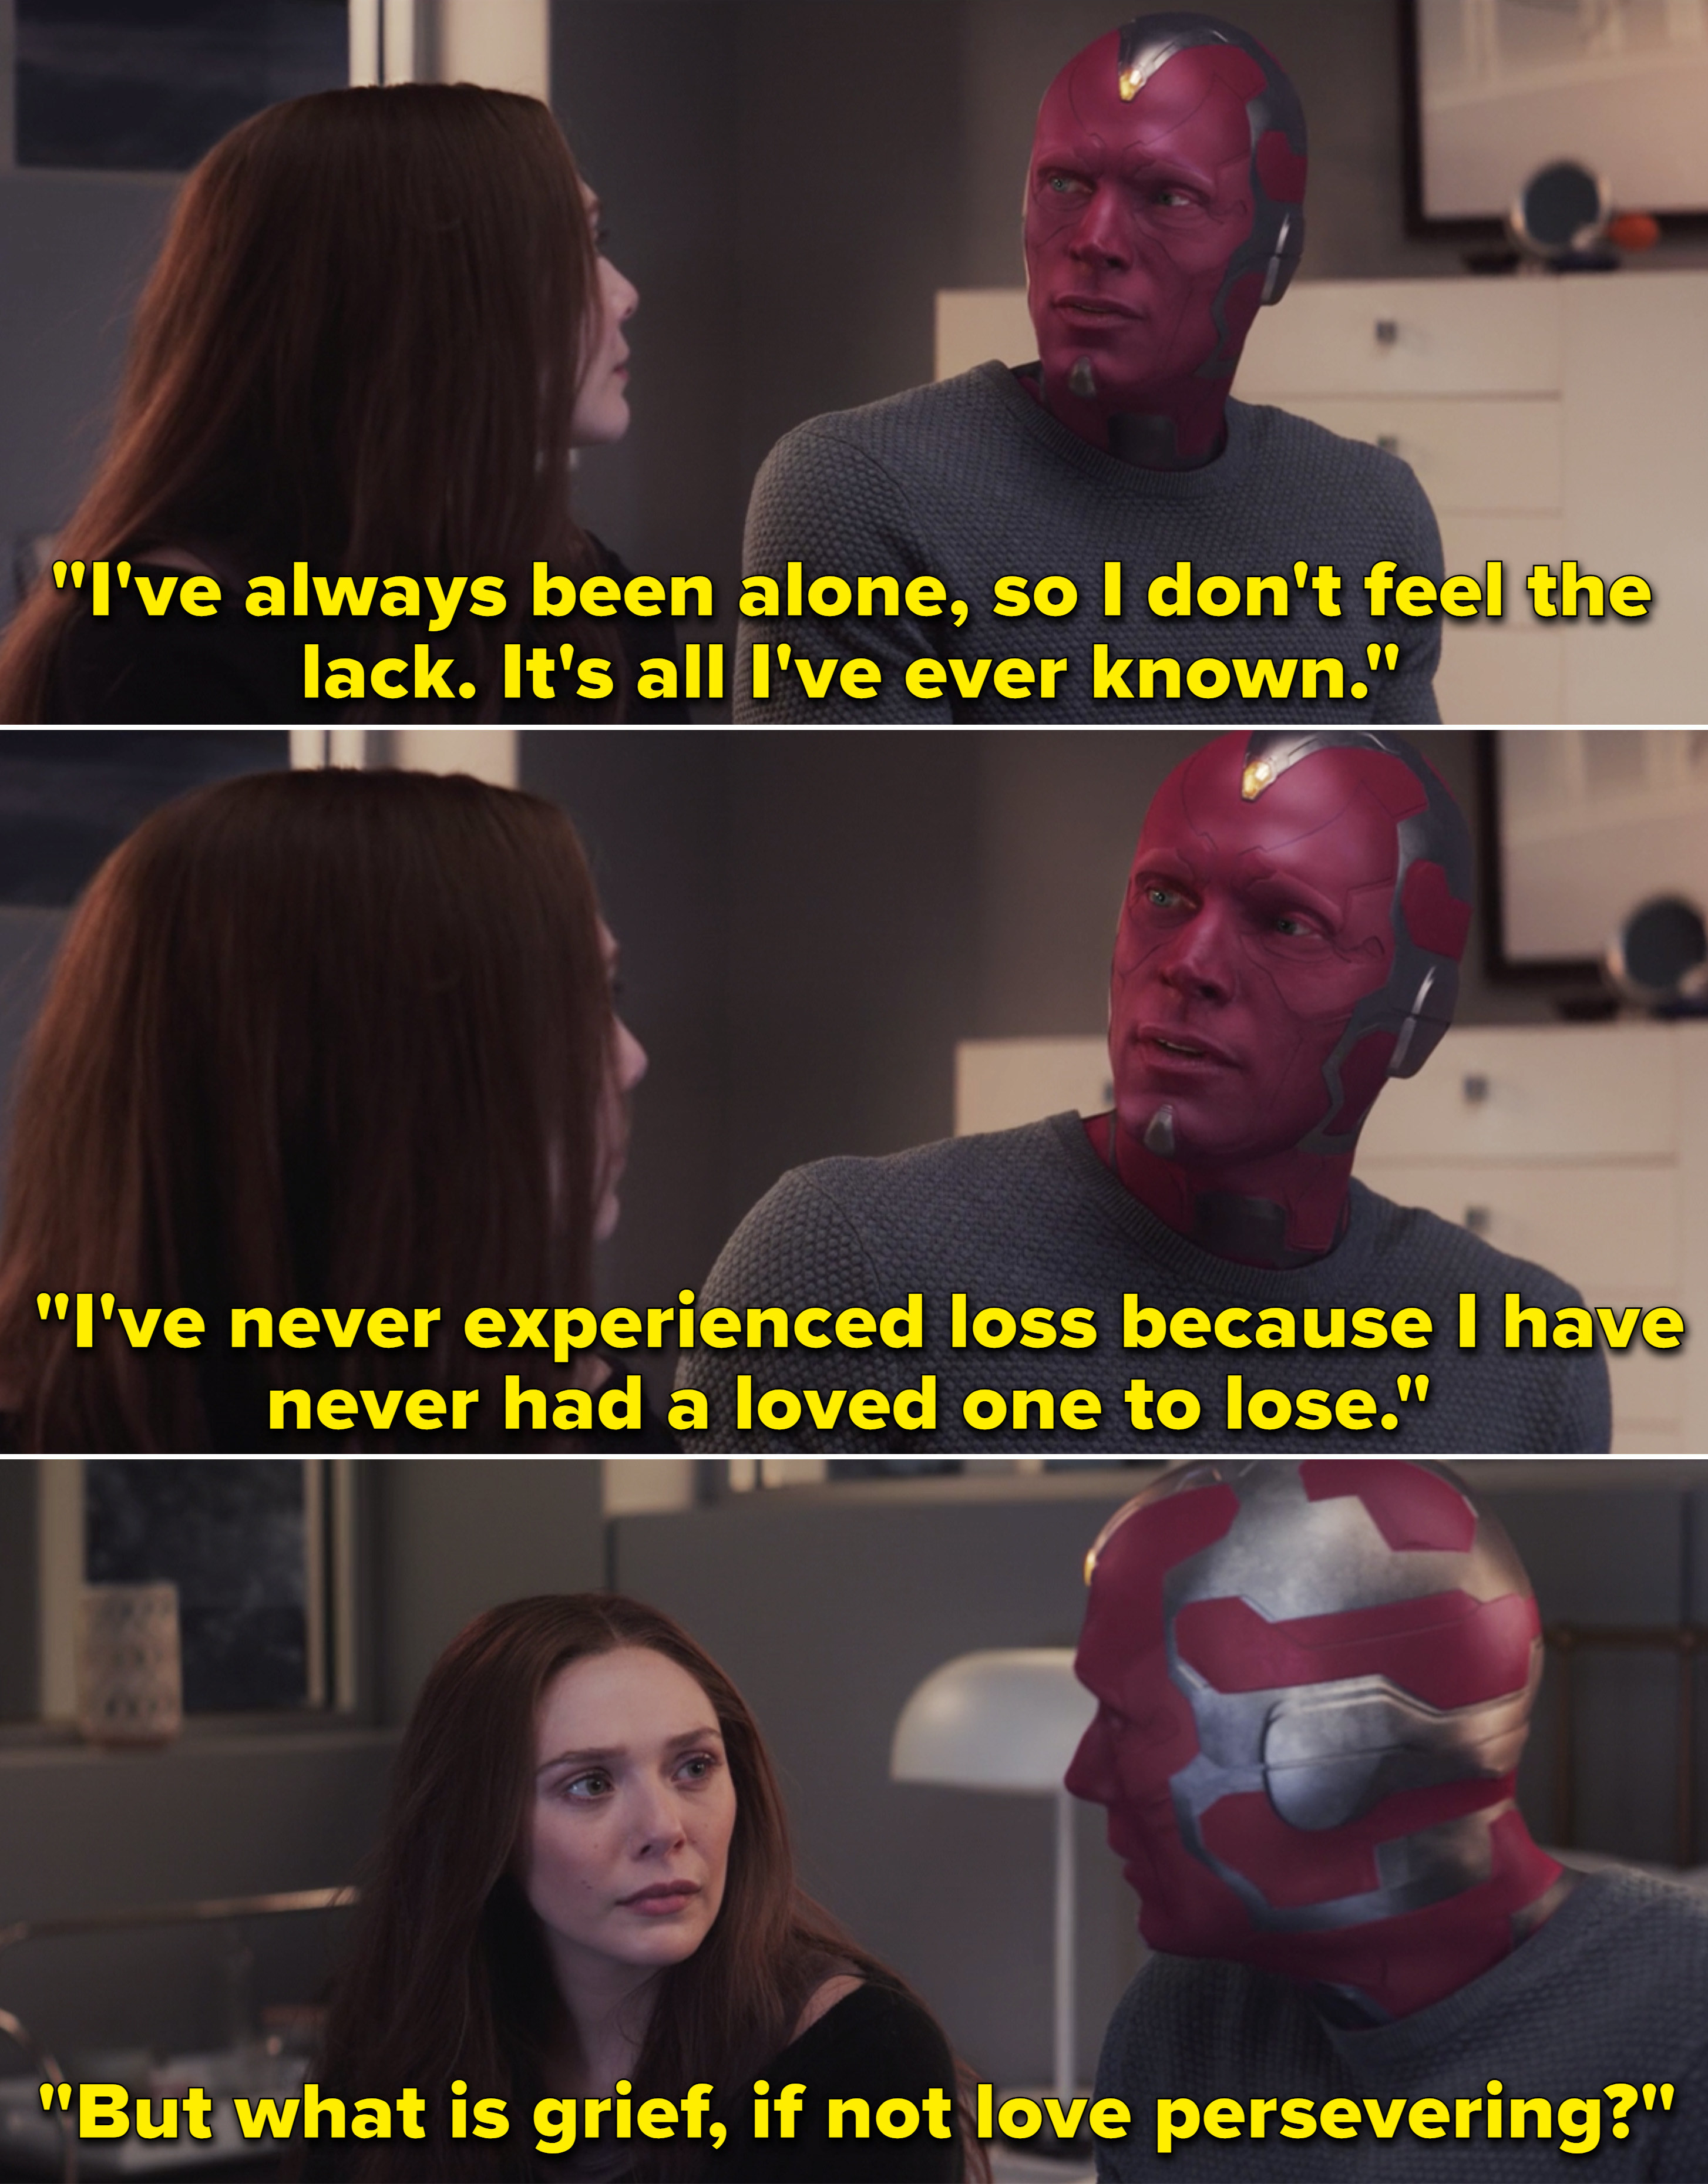 In WandaVision, Vision explaining to Wanda that he has never felt loss, but asking &quot;What is grief, if not love persevering?&quot;